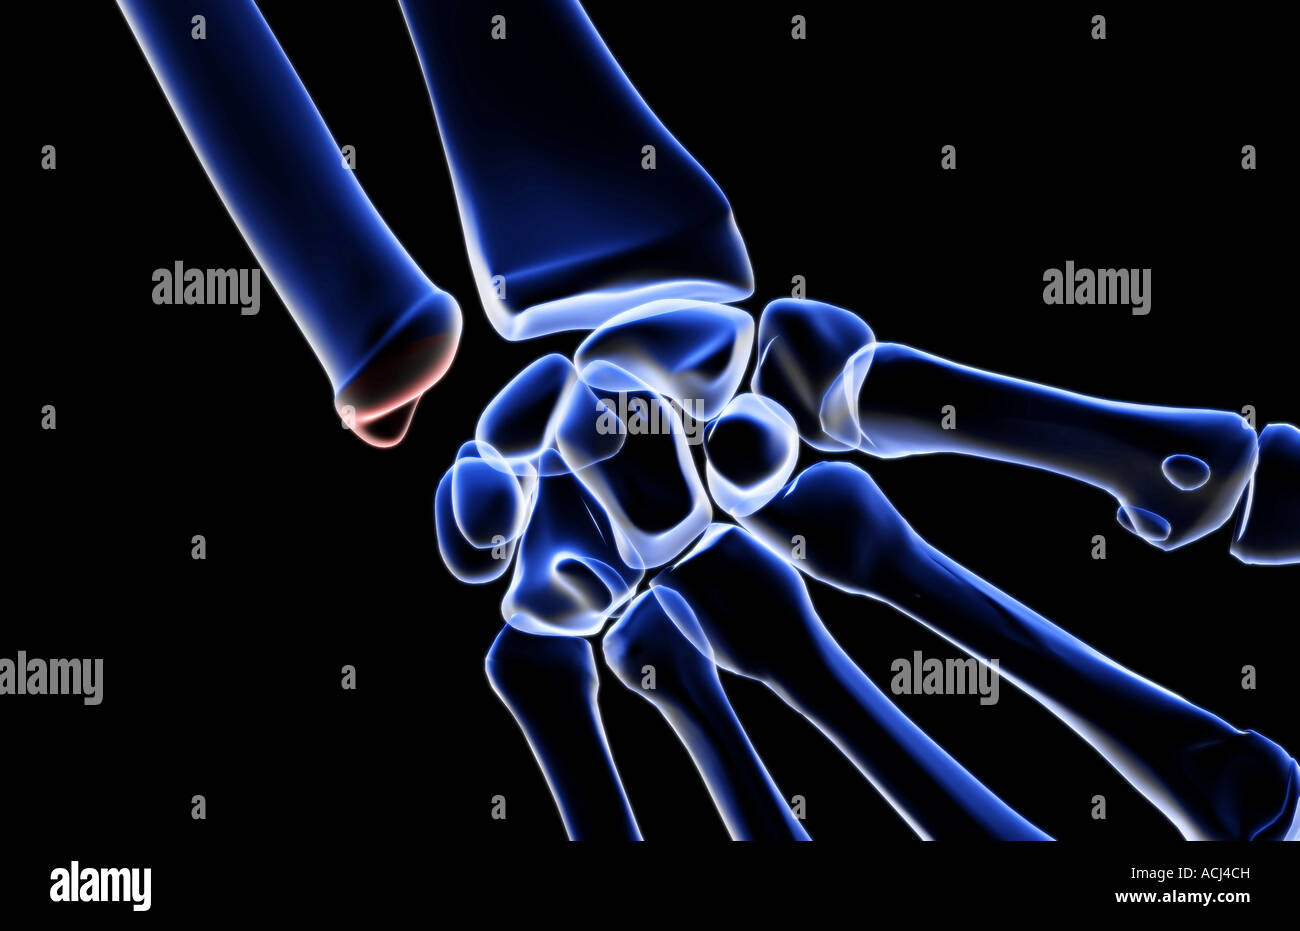 Triquetrum Bone High Resolution Stock Photography and Images - Alamy